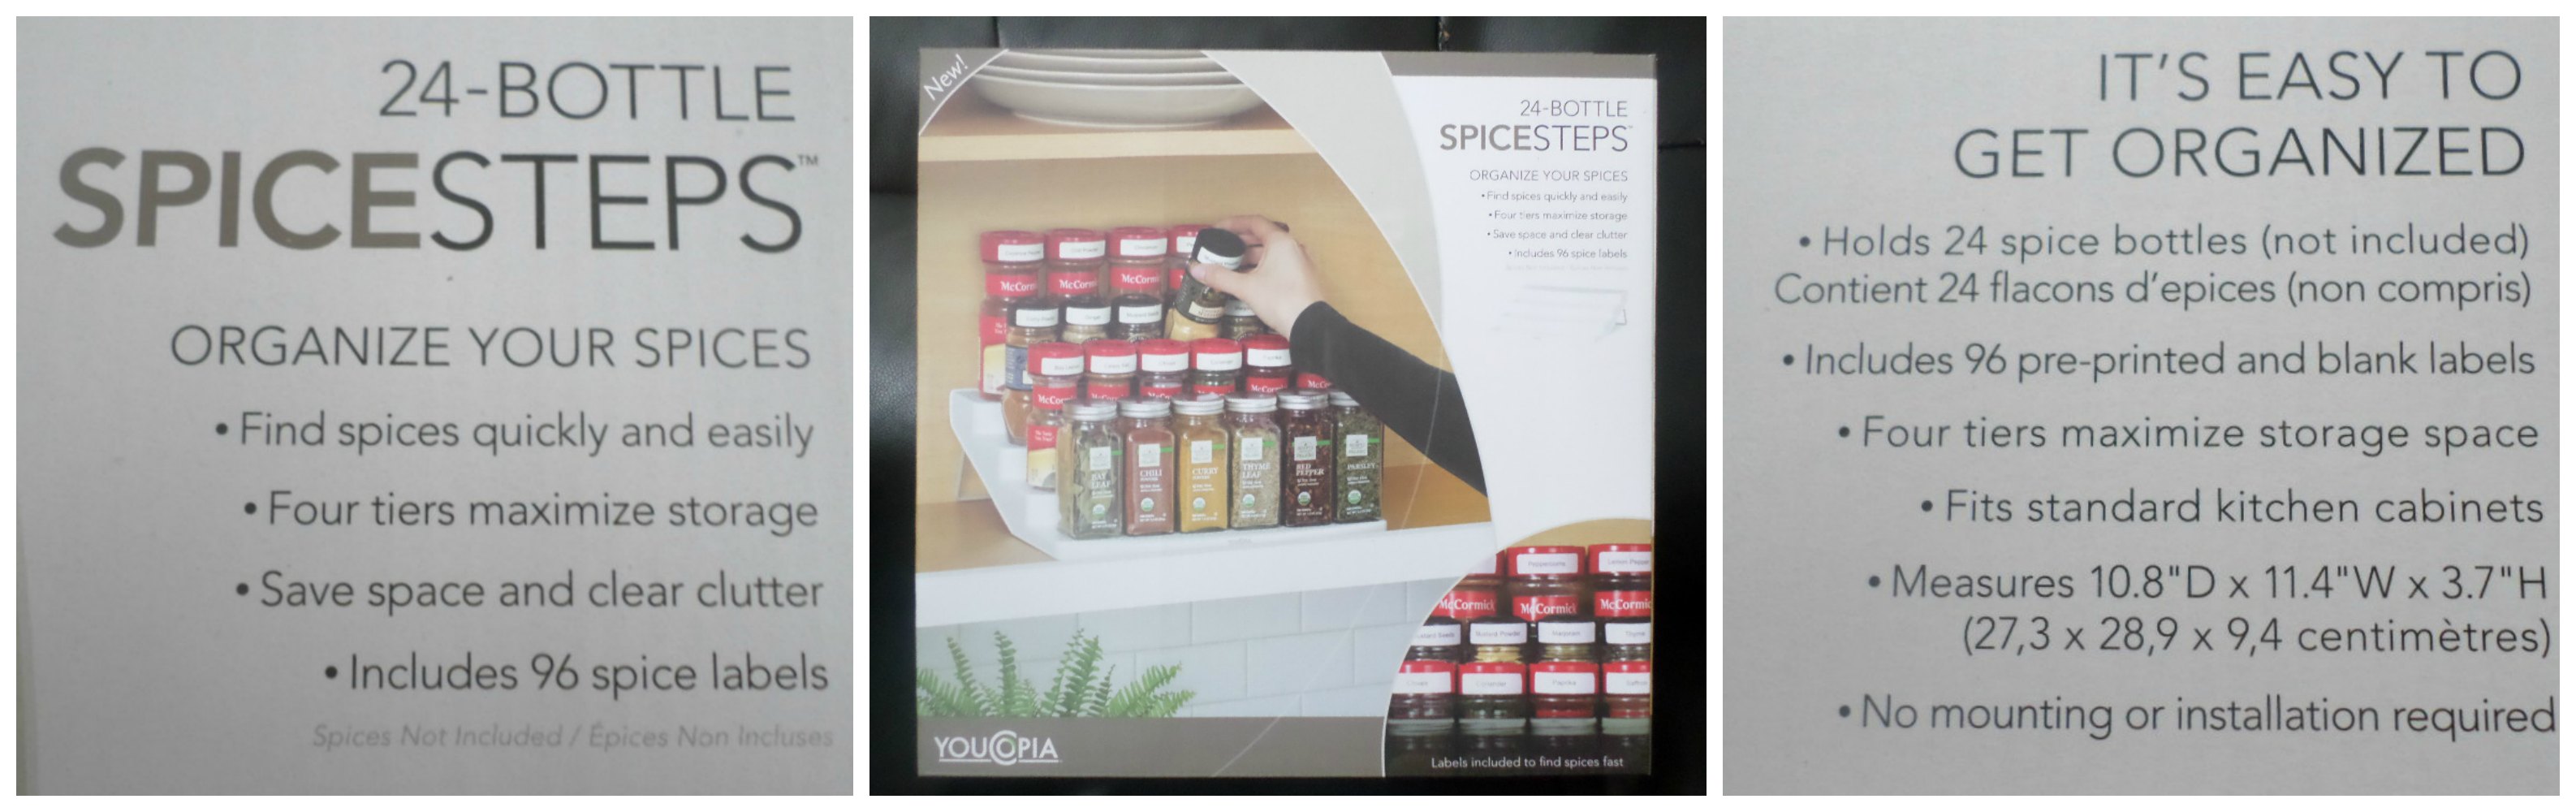 YouCopia SpiceSteps